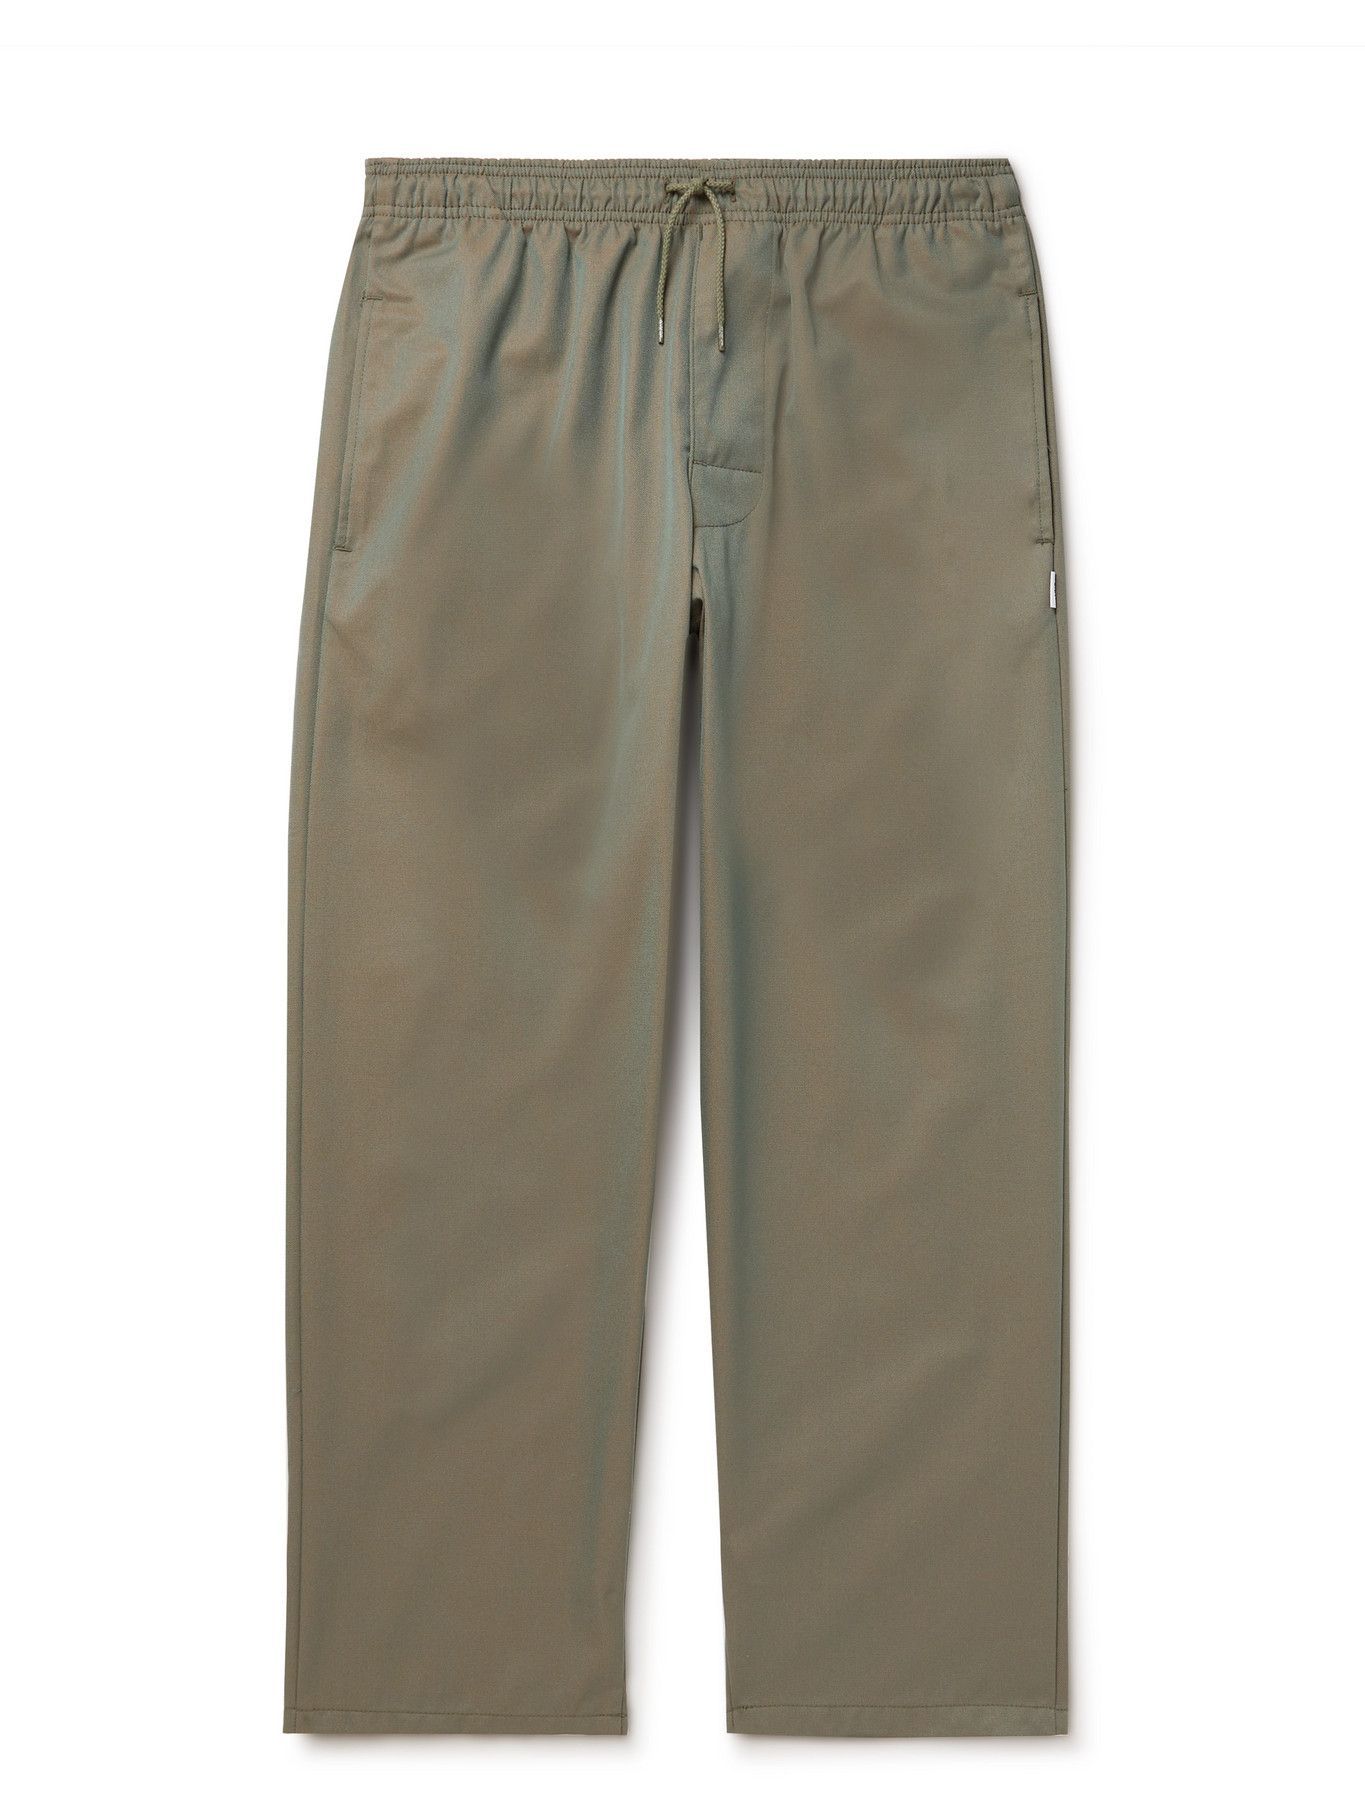 WTAPS - Seagull 02 EcoVero-Blend Twill Drawstring Trousers - Green 